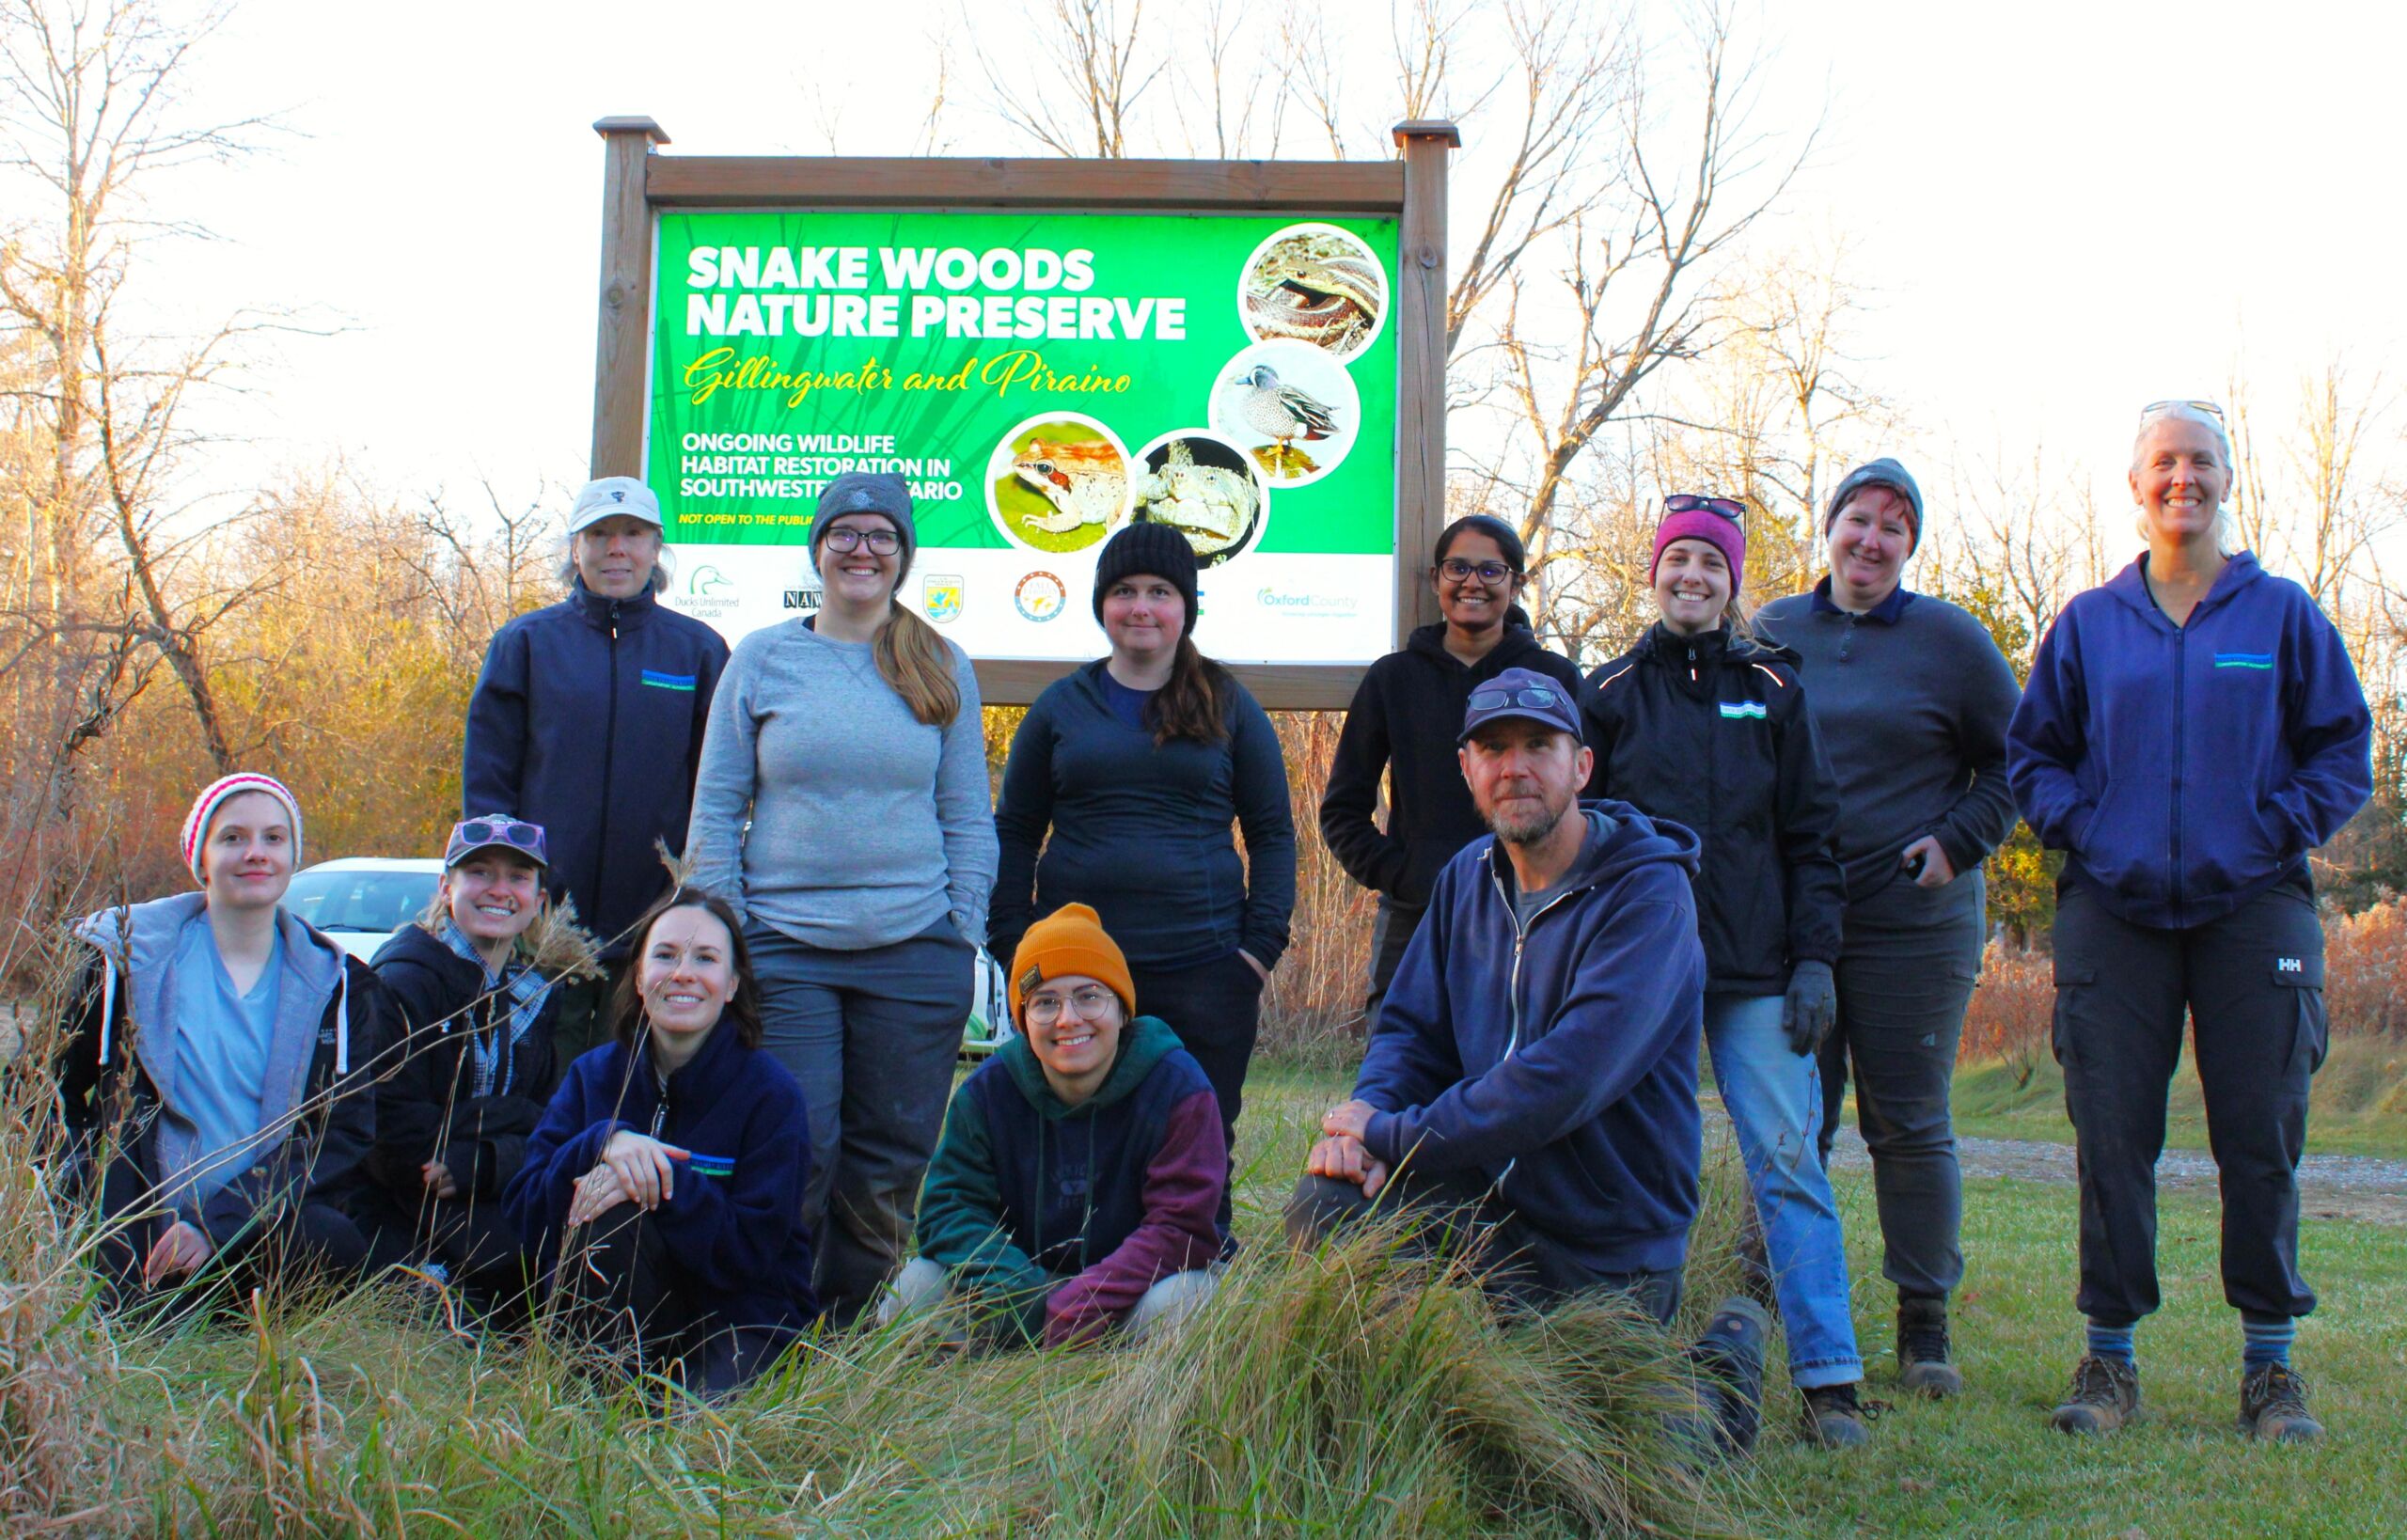 UTRCA staff pose in front of a sign for Snake Woods Nature Preserve.